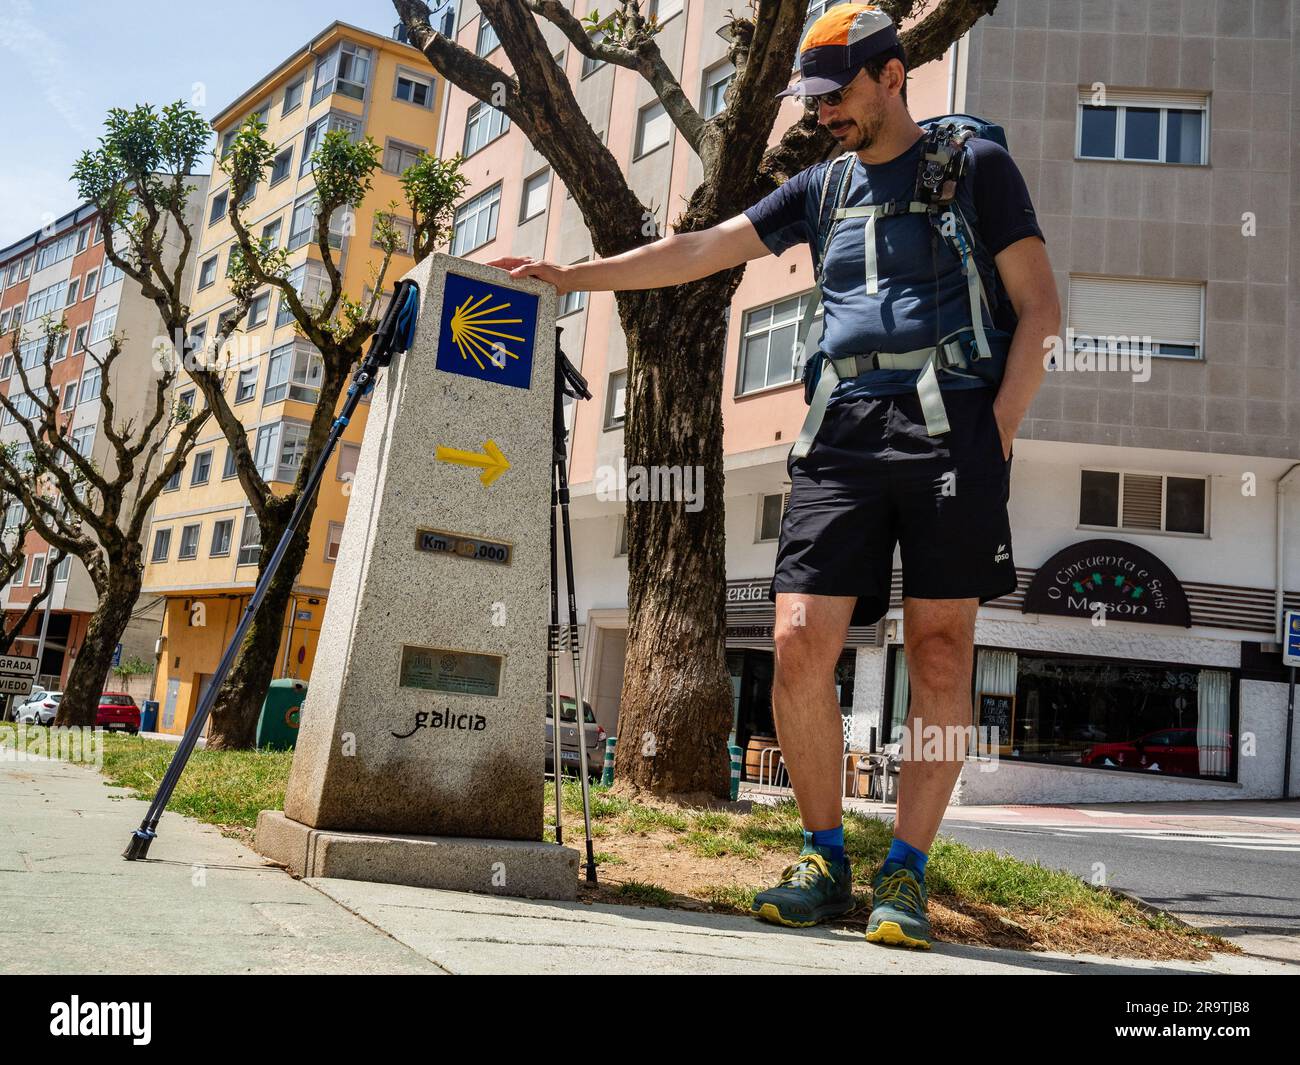 May 29, 2023, Lugo, Spain: A pilgrim is seen posing next to the stone marker that is pointing at the one-hundred kilometer. The Camino de Santiago (the Way of St. James) is a large network of ancient pilgrim routes stretching across Europe and coming together at the tomb of St. James (Santiago in Spanish) in Santiago de Compostela in northwest Spain. The Camino Primitivo is the original and oldest pilgrimage route. It links Oviedo with Santiago de Compostela. It's characterized as being one of the hard routes but also for being one of the most attractive Jacobean routes. In 2015, it was listed Stock Photo